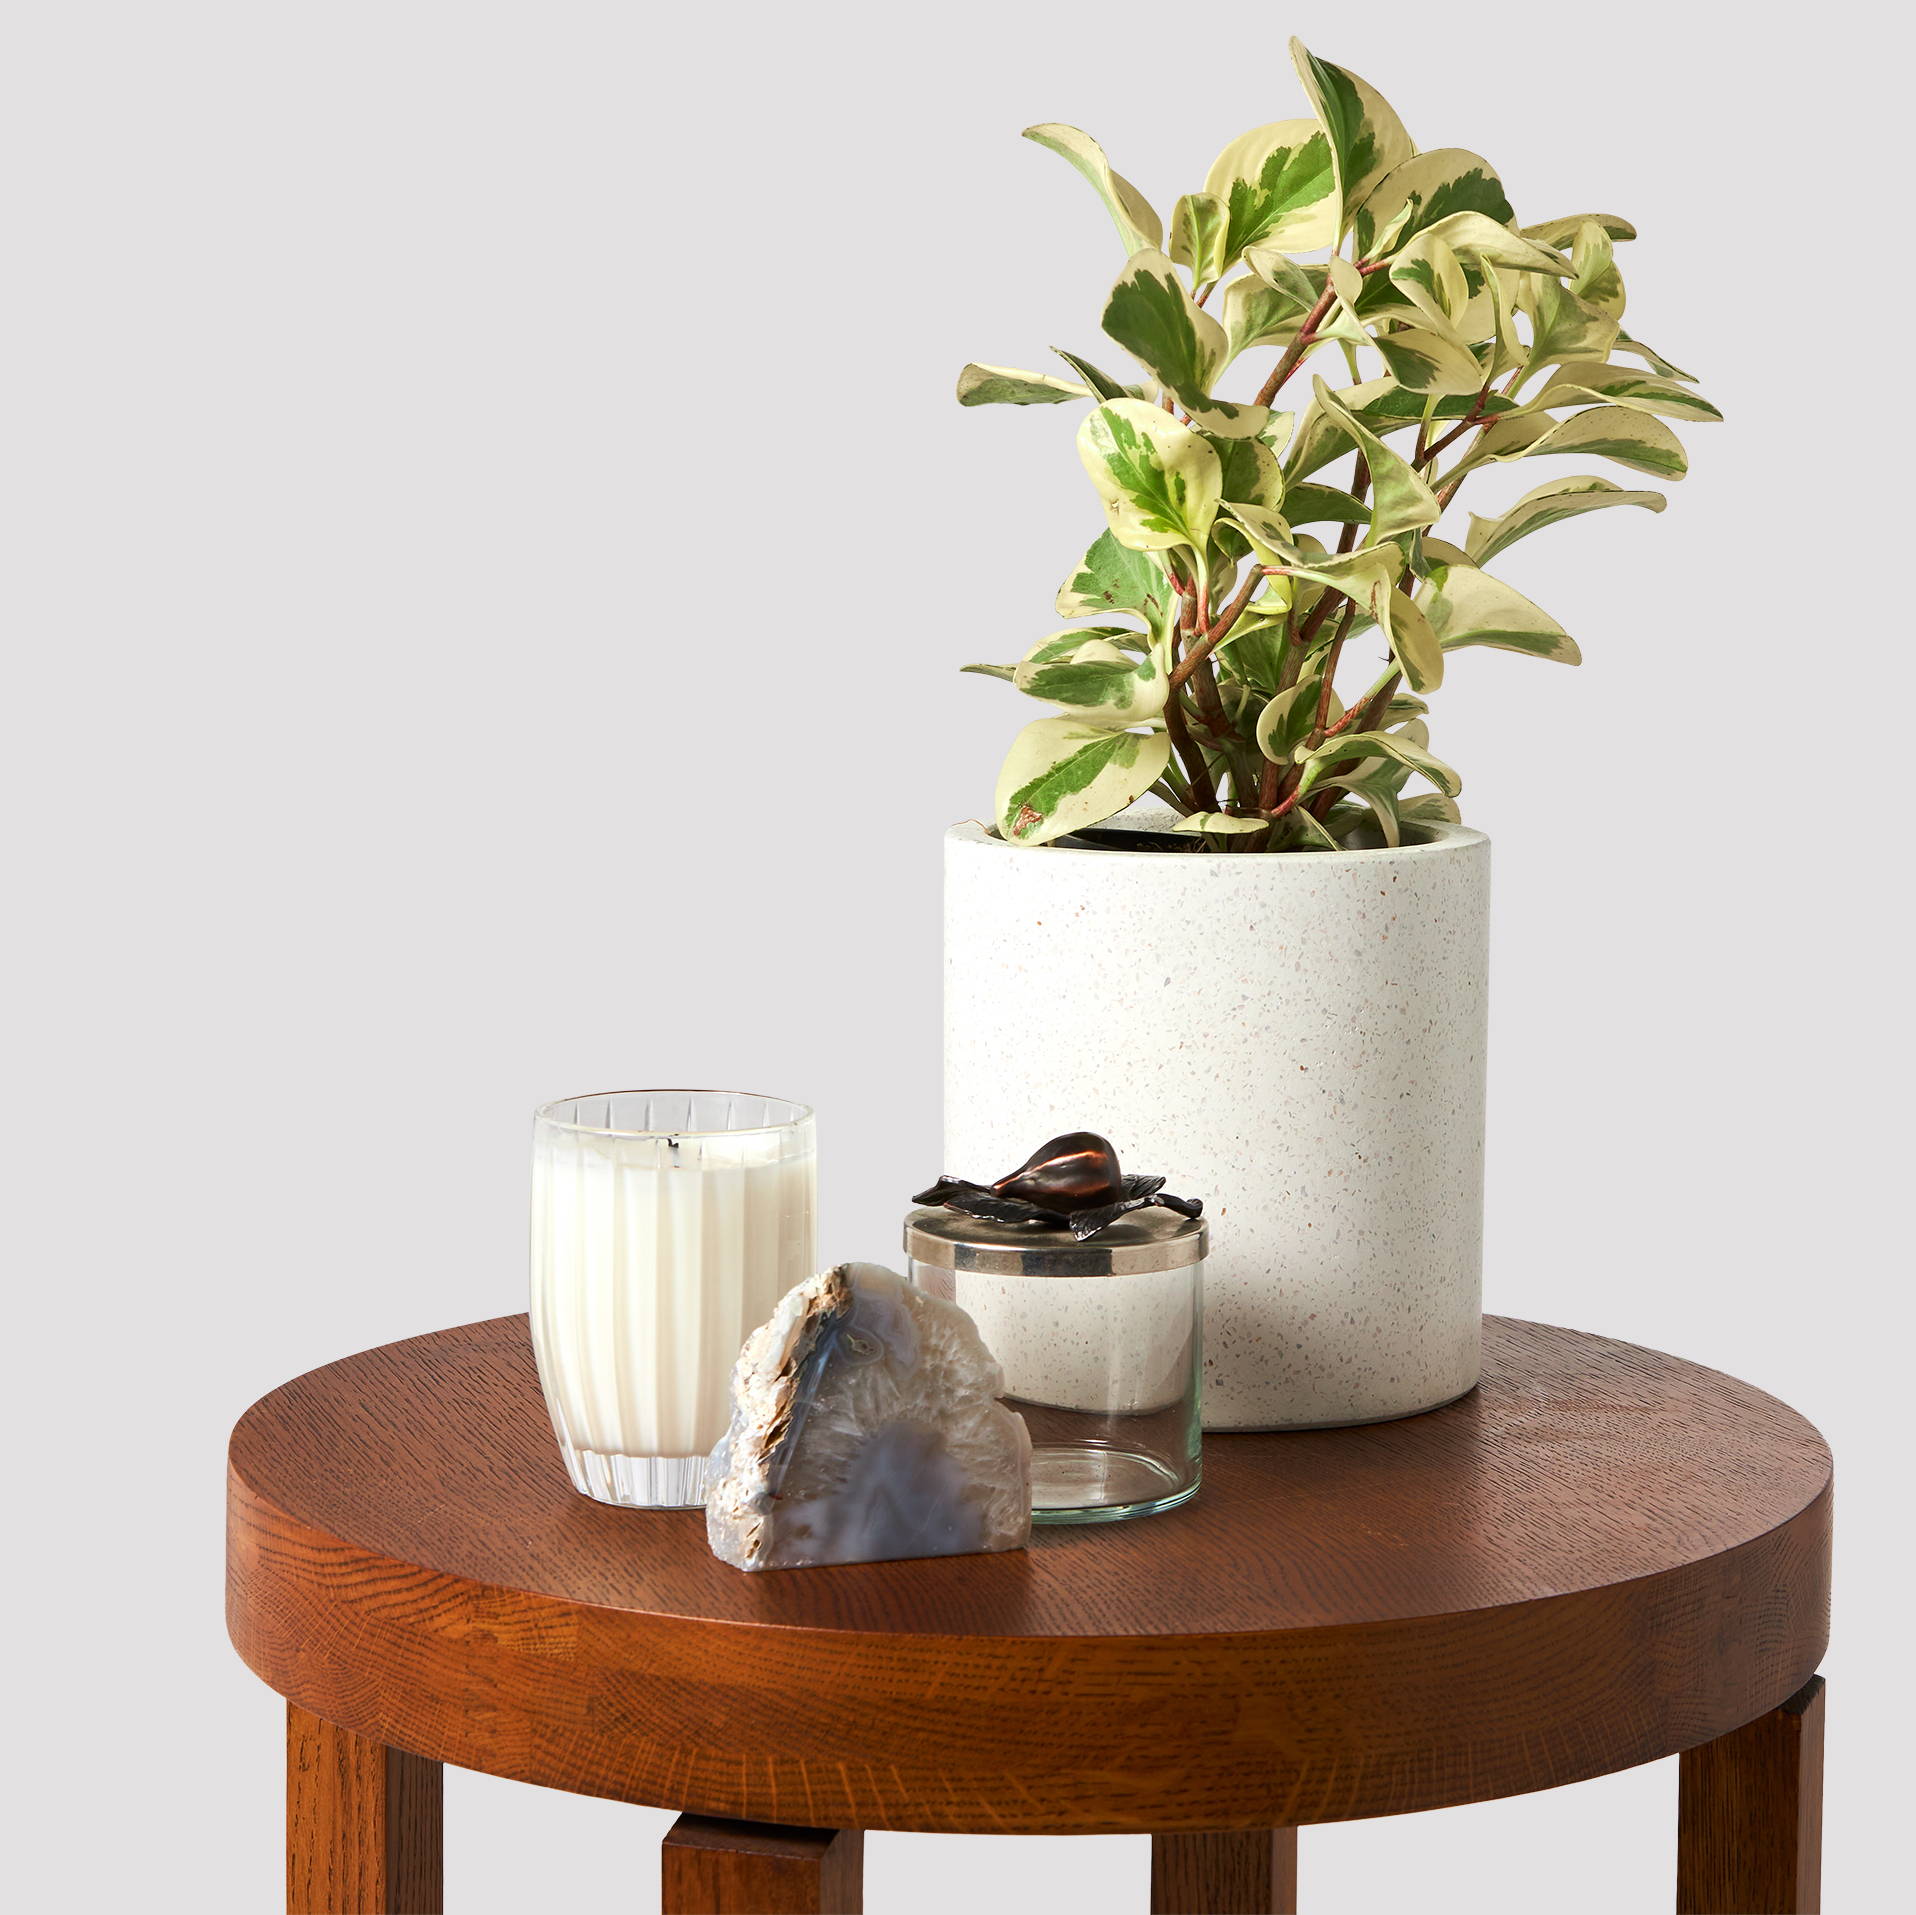 Peperomia Obtusifolia Albo-Marginata indoor plant on timber table top with accessories